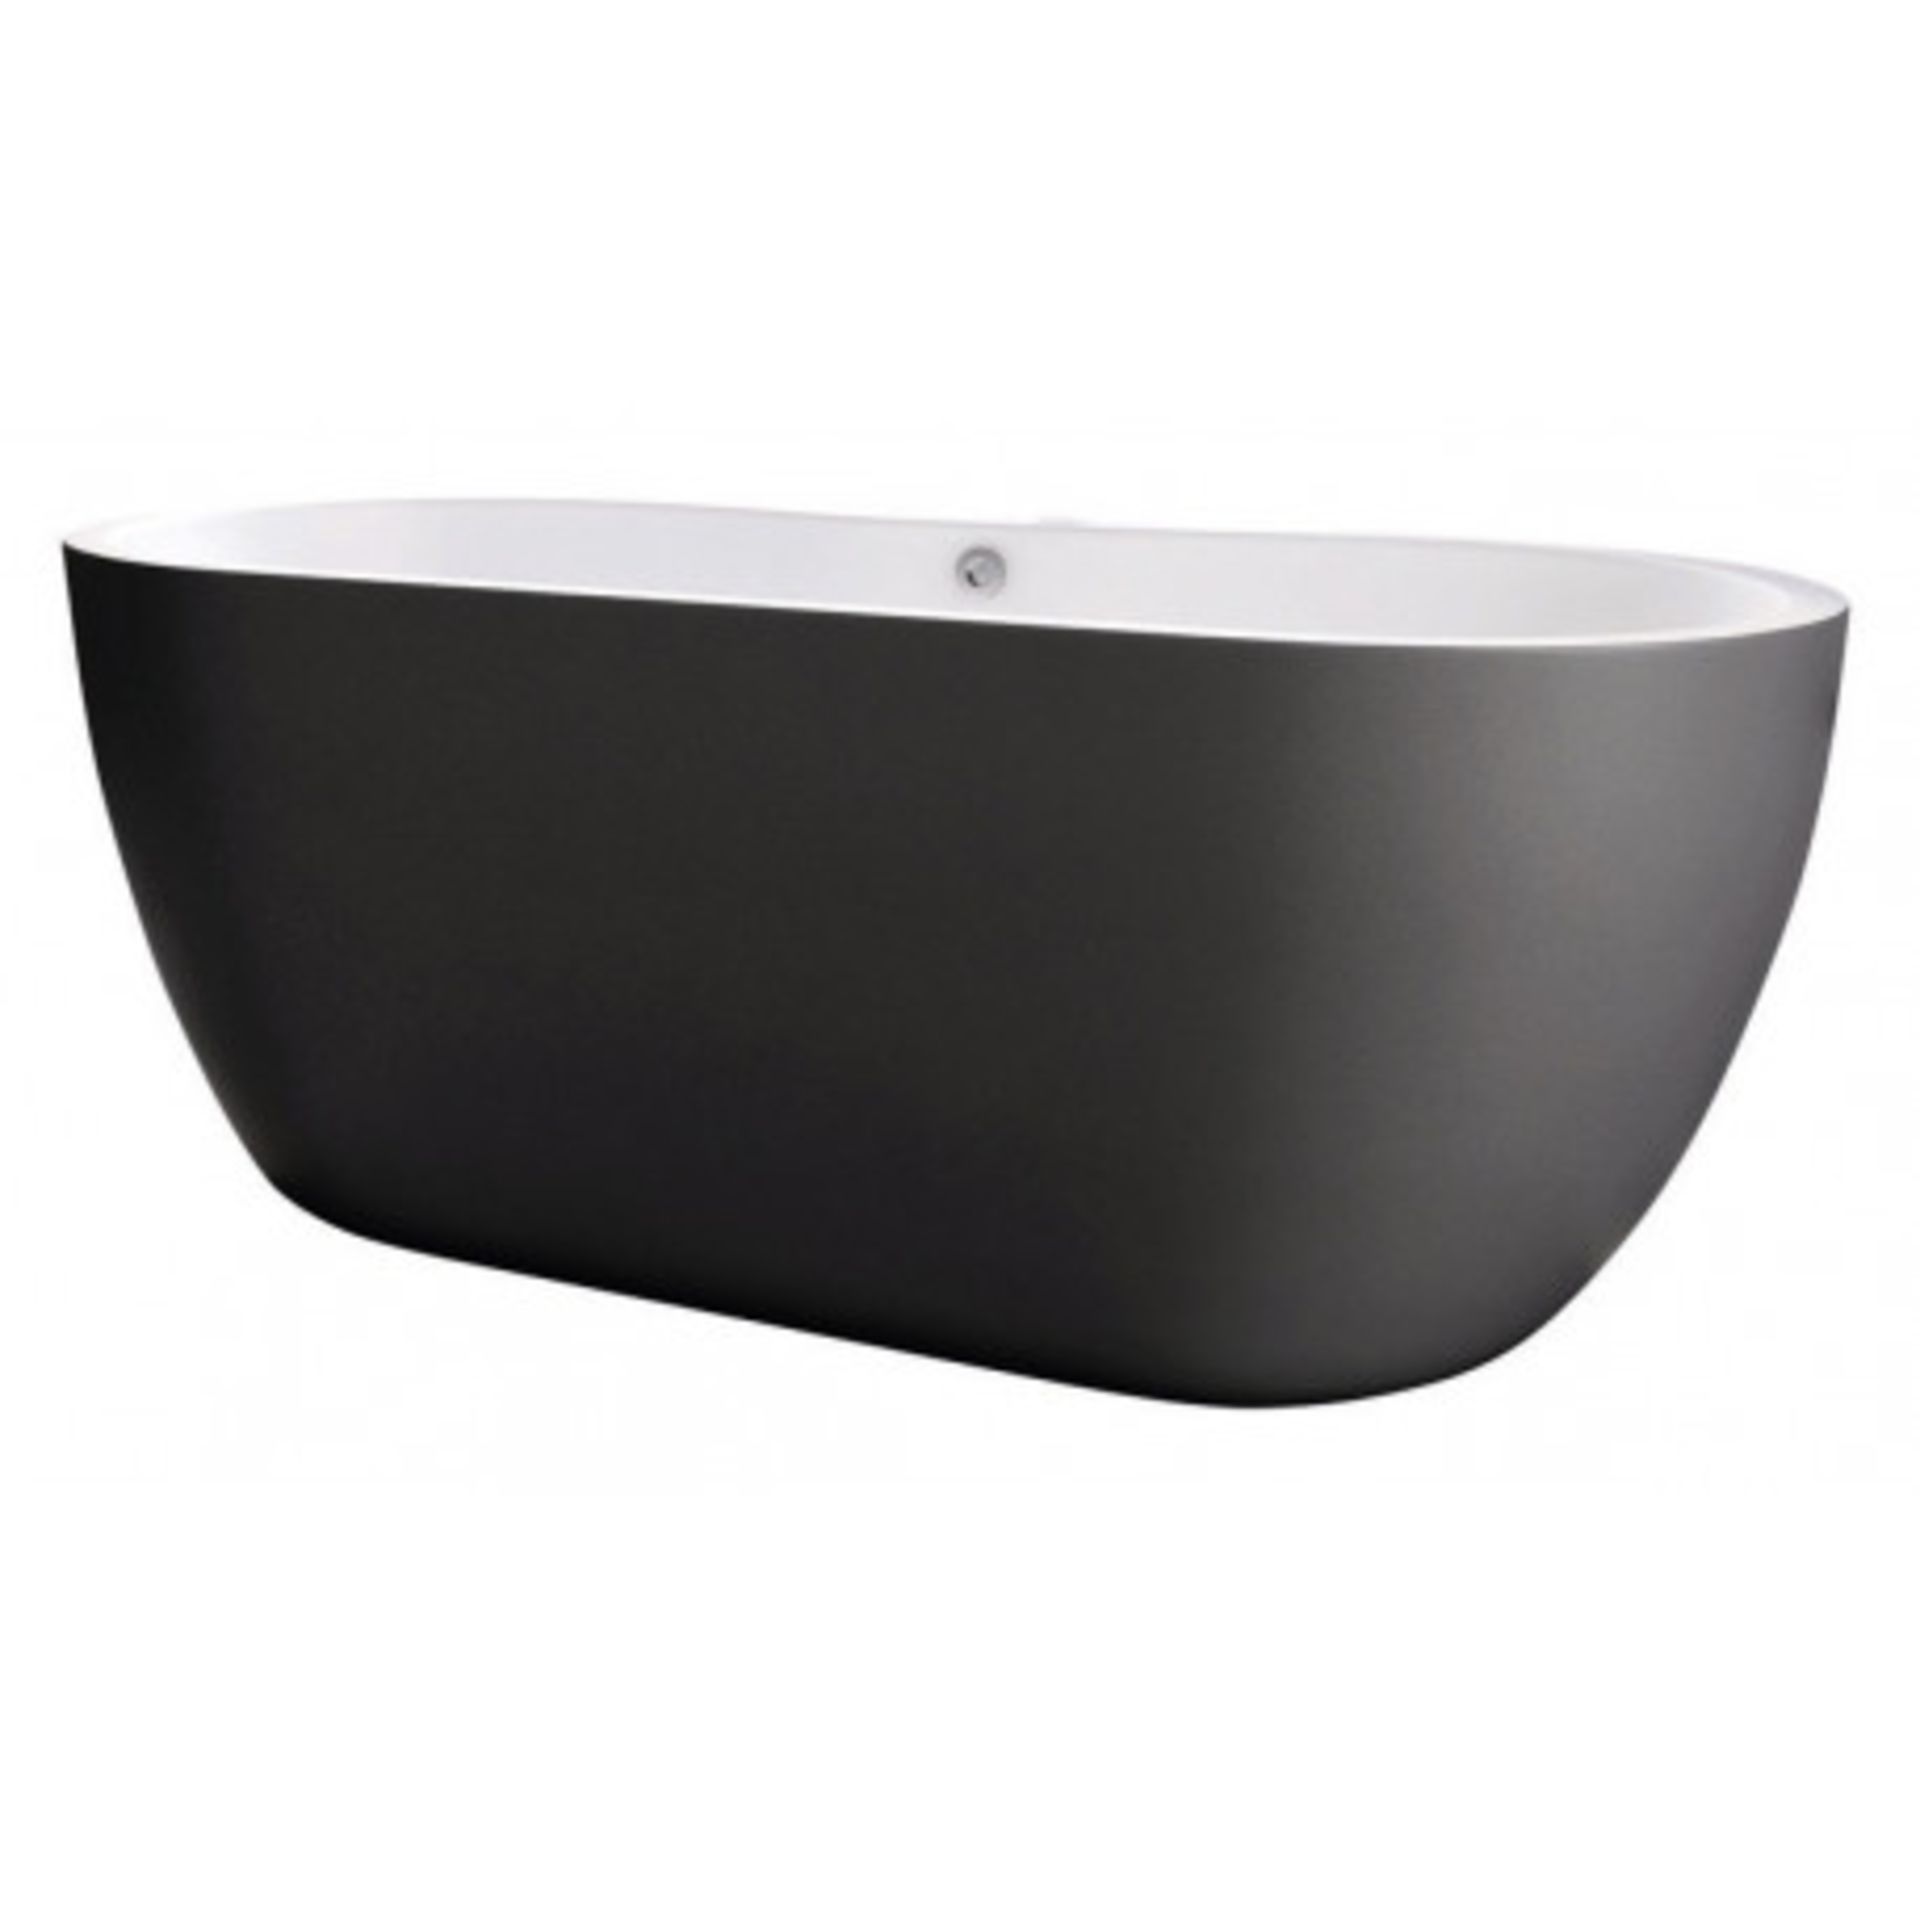 New (J2) 1655x740mm Round Double Ended Black Freestanding Bath. Rrp £2,337.Elegant, Contempor... - Image 5 of 5